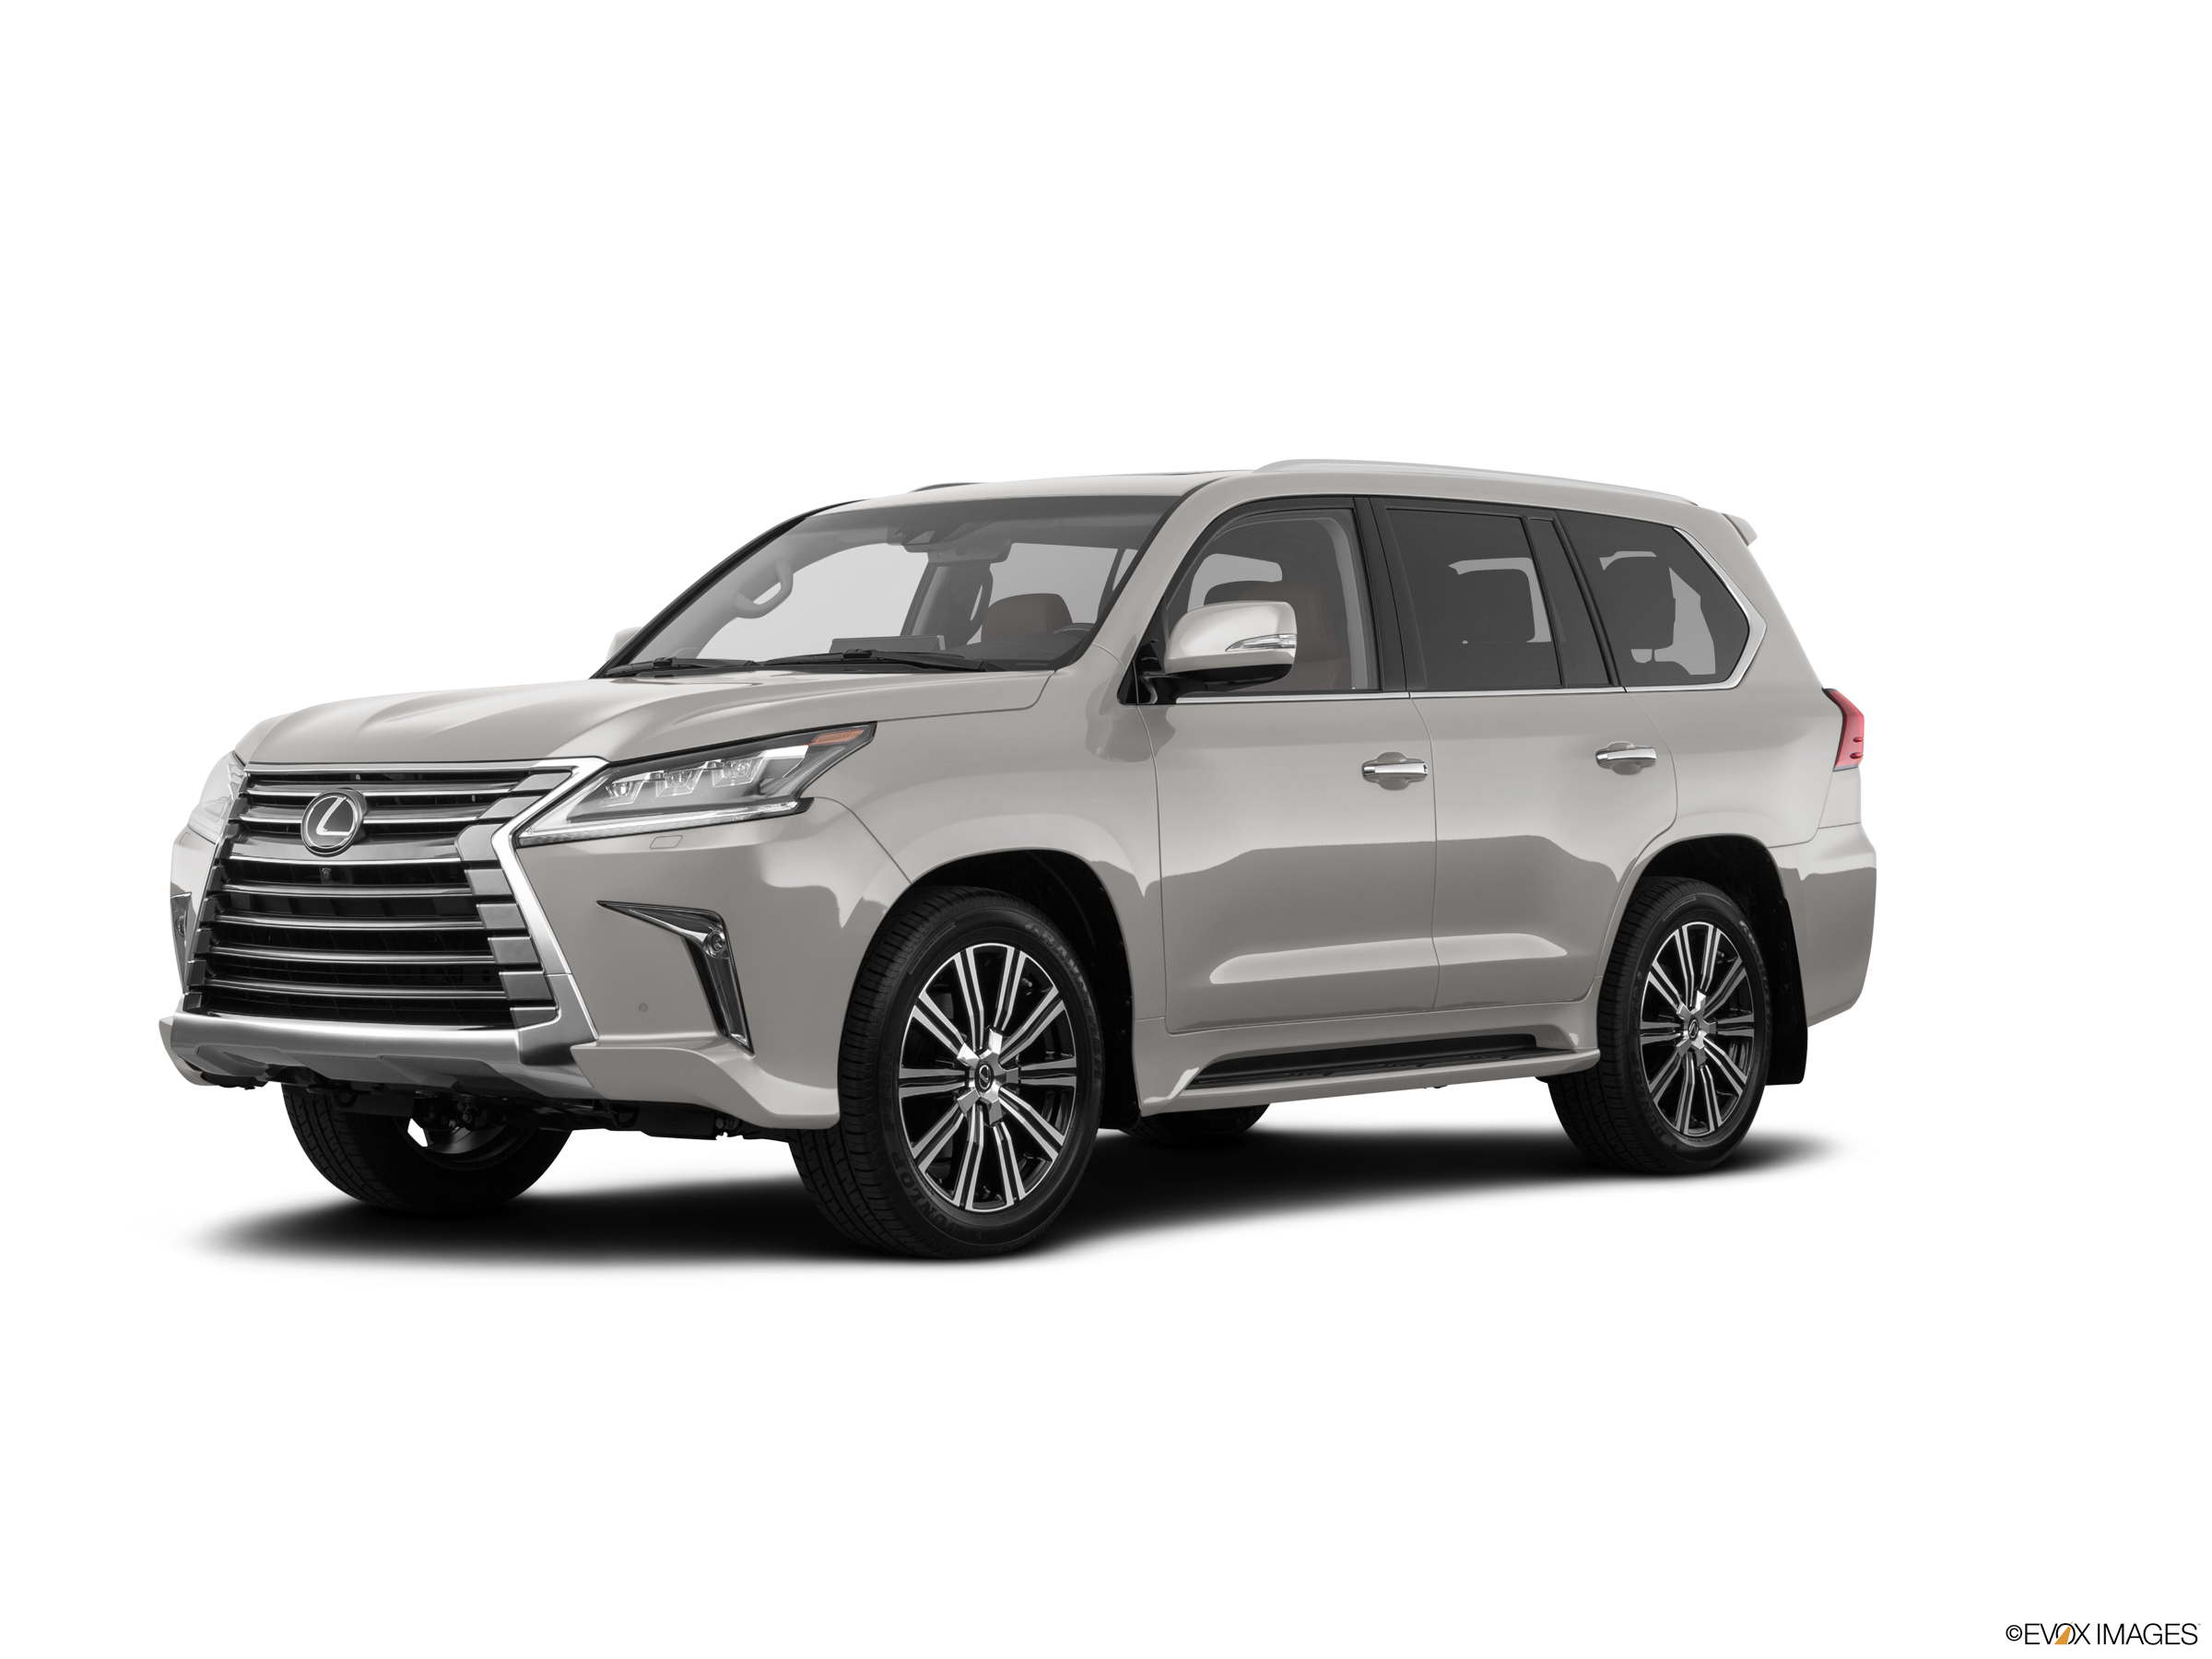 2020 Lexus LX Prices, Reviews, and Photos - MotorTrend